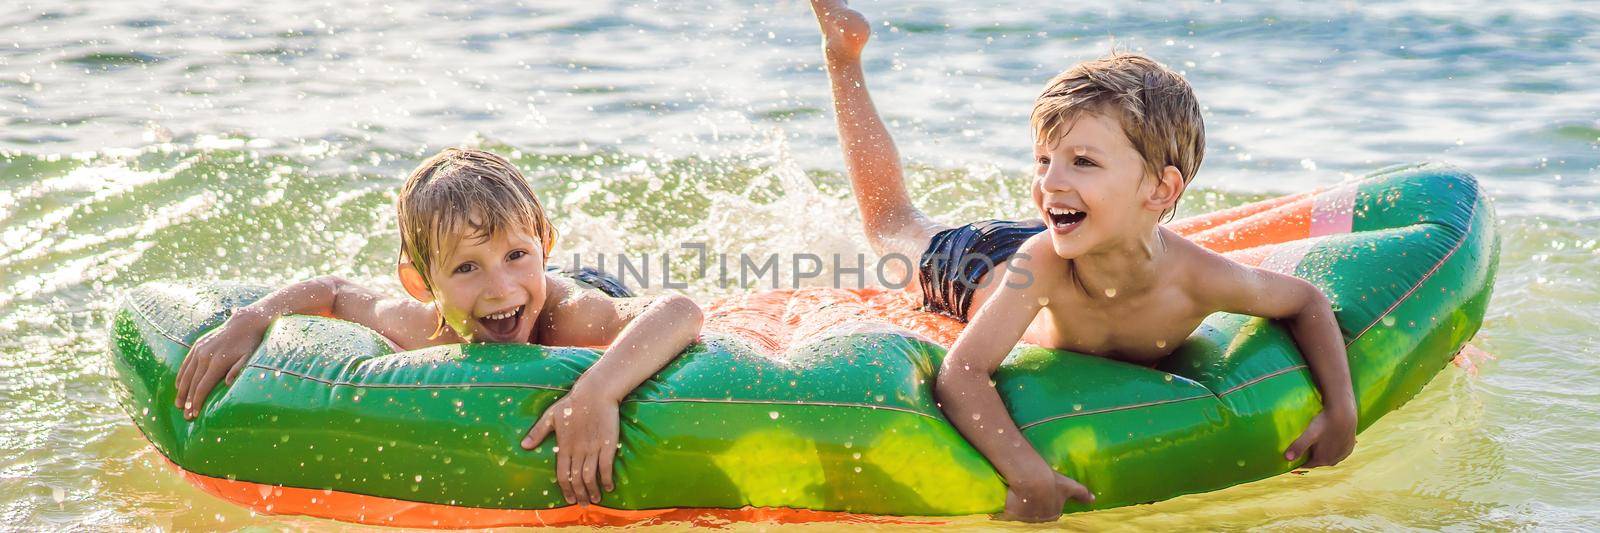 Children swim in the sea on an inflatable mattress and have fun BANNER, LONG FORMAT by galitskaya